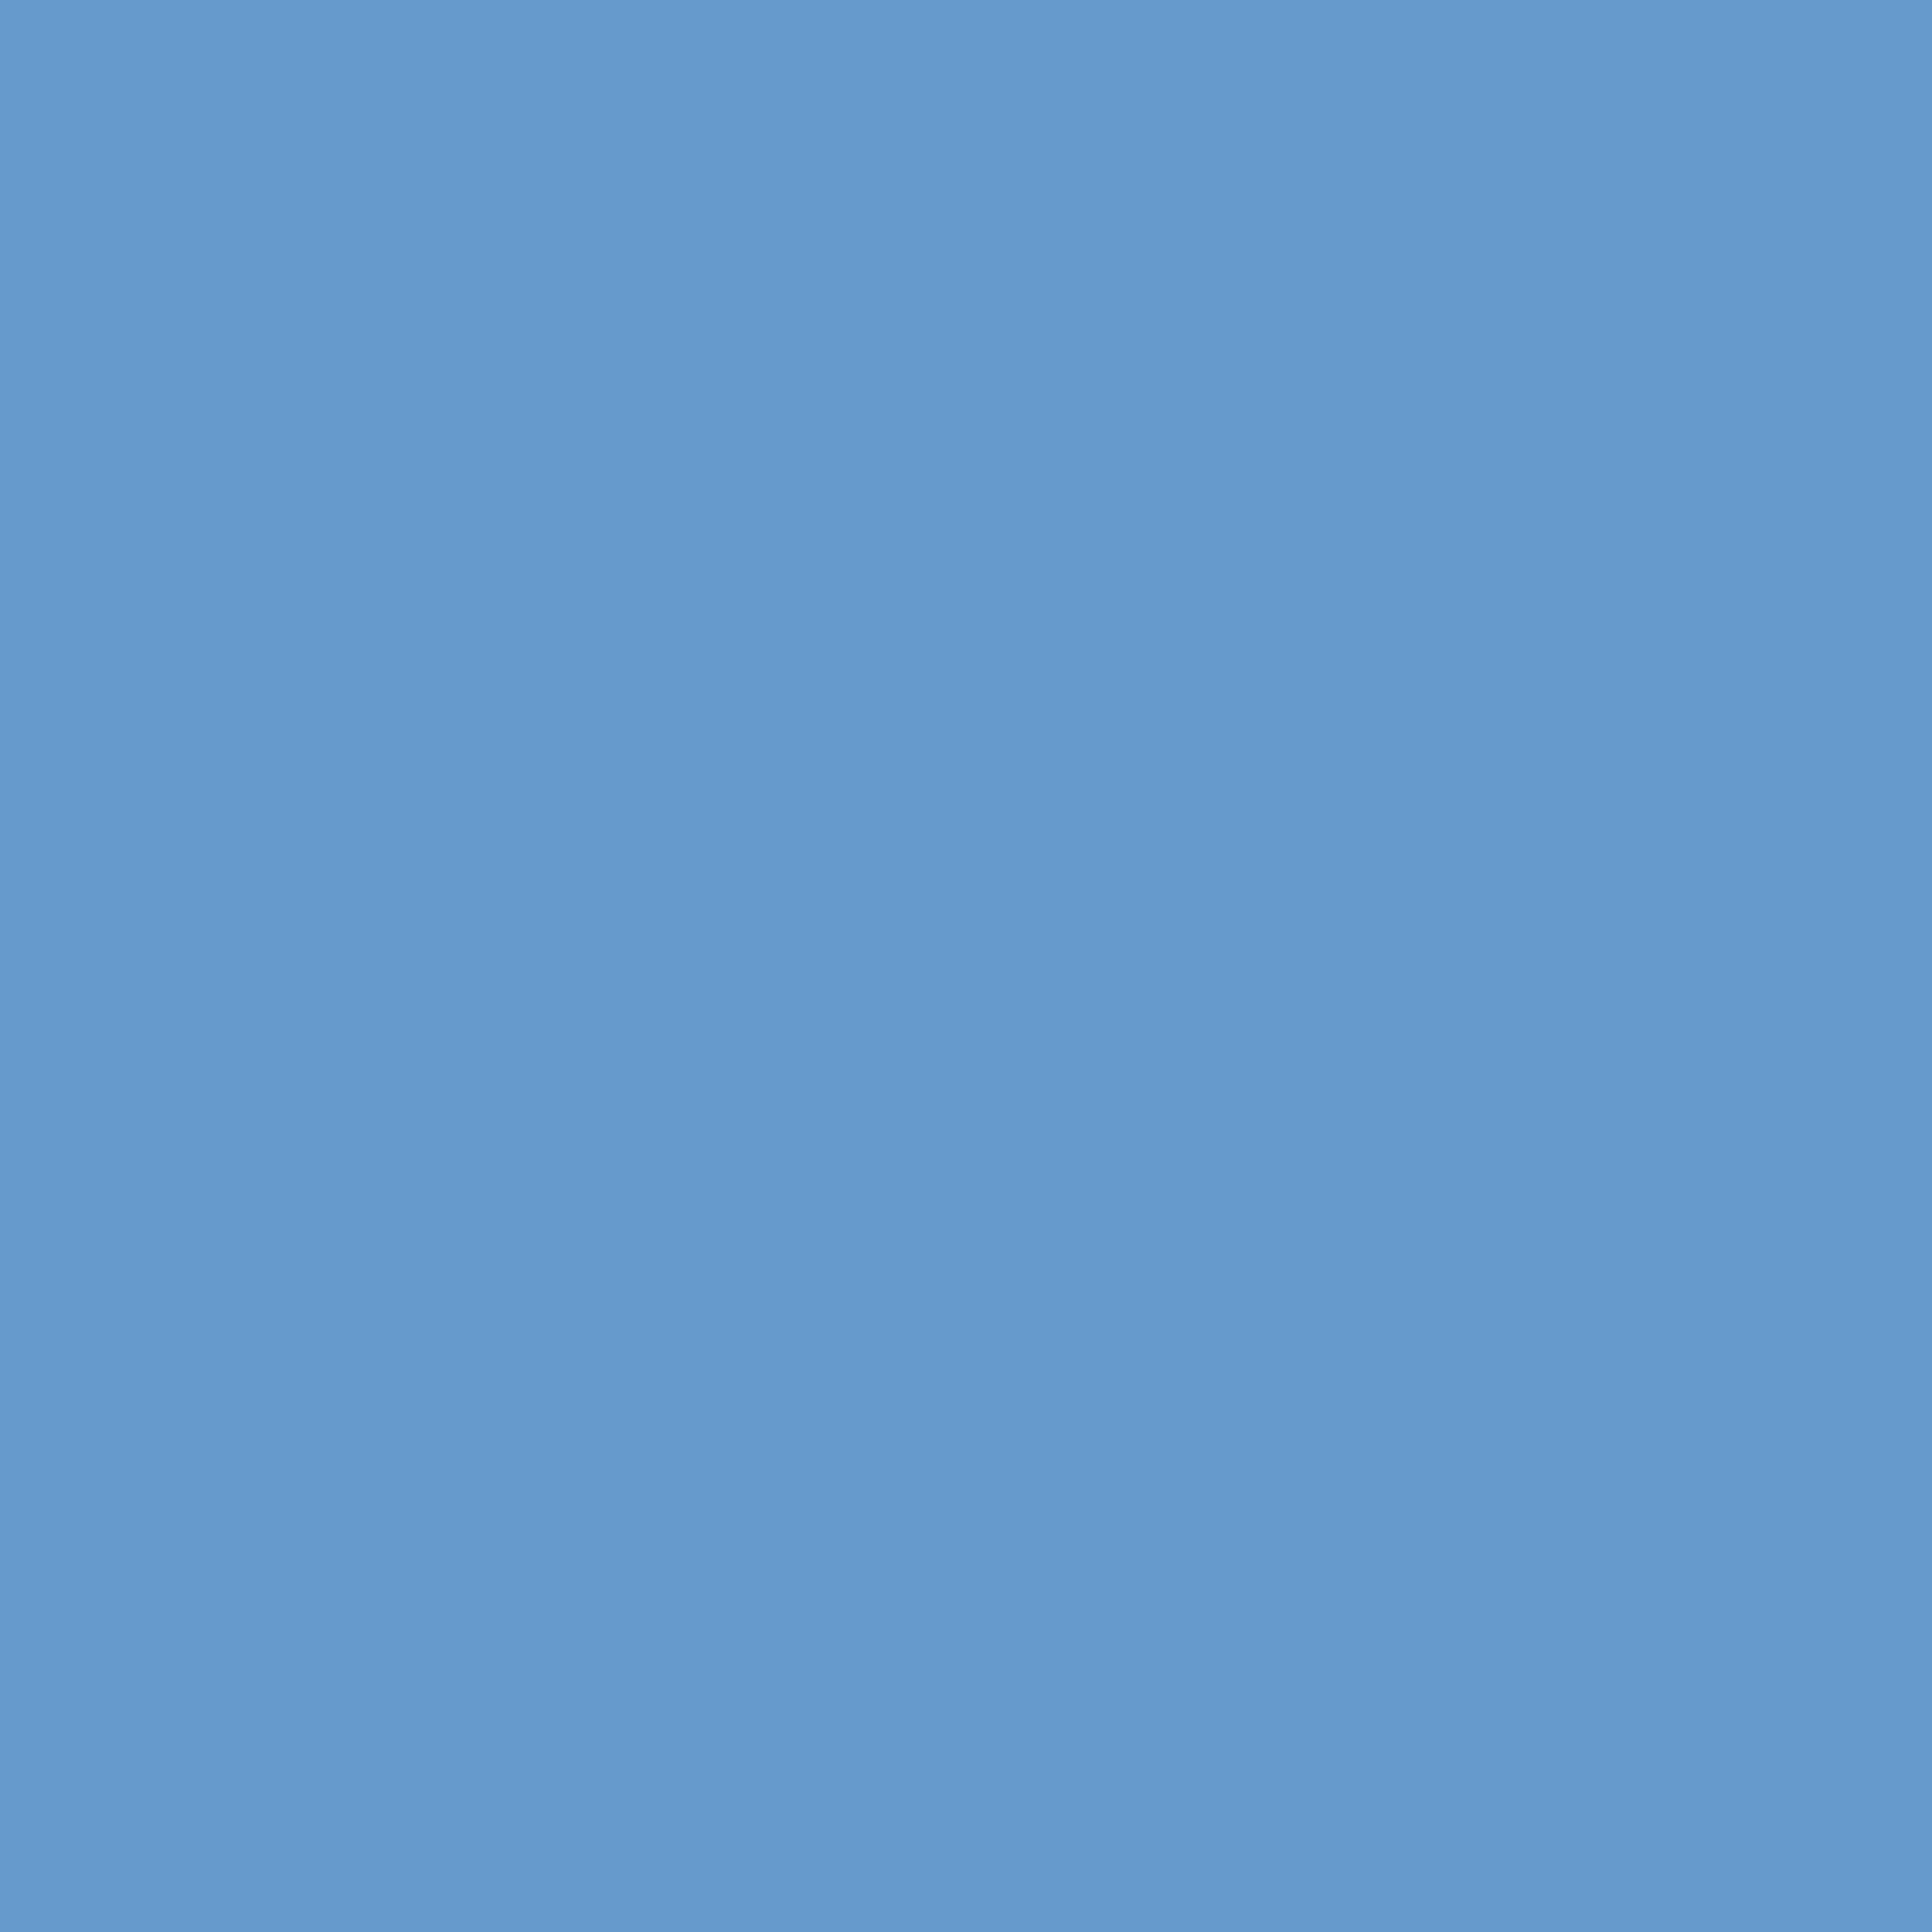 3600x3600 Blue-gray Solid Color Background